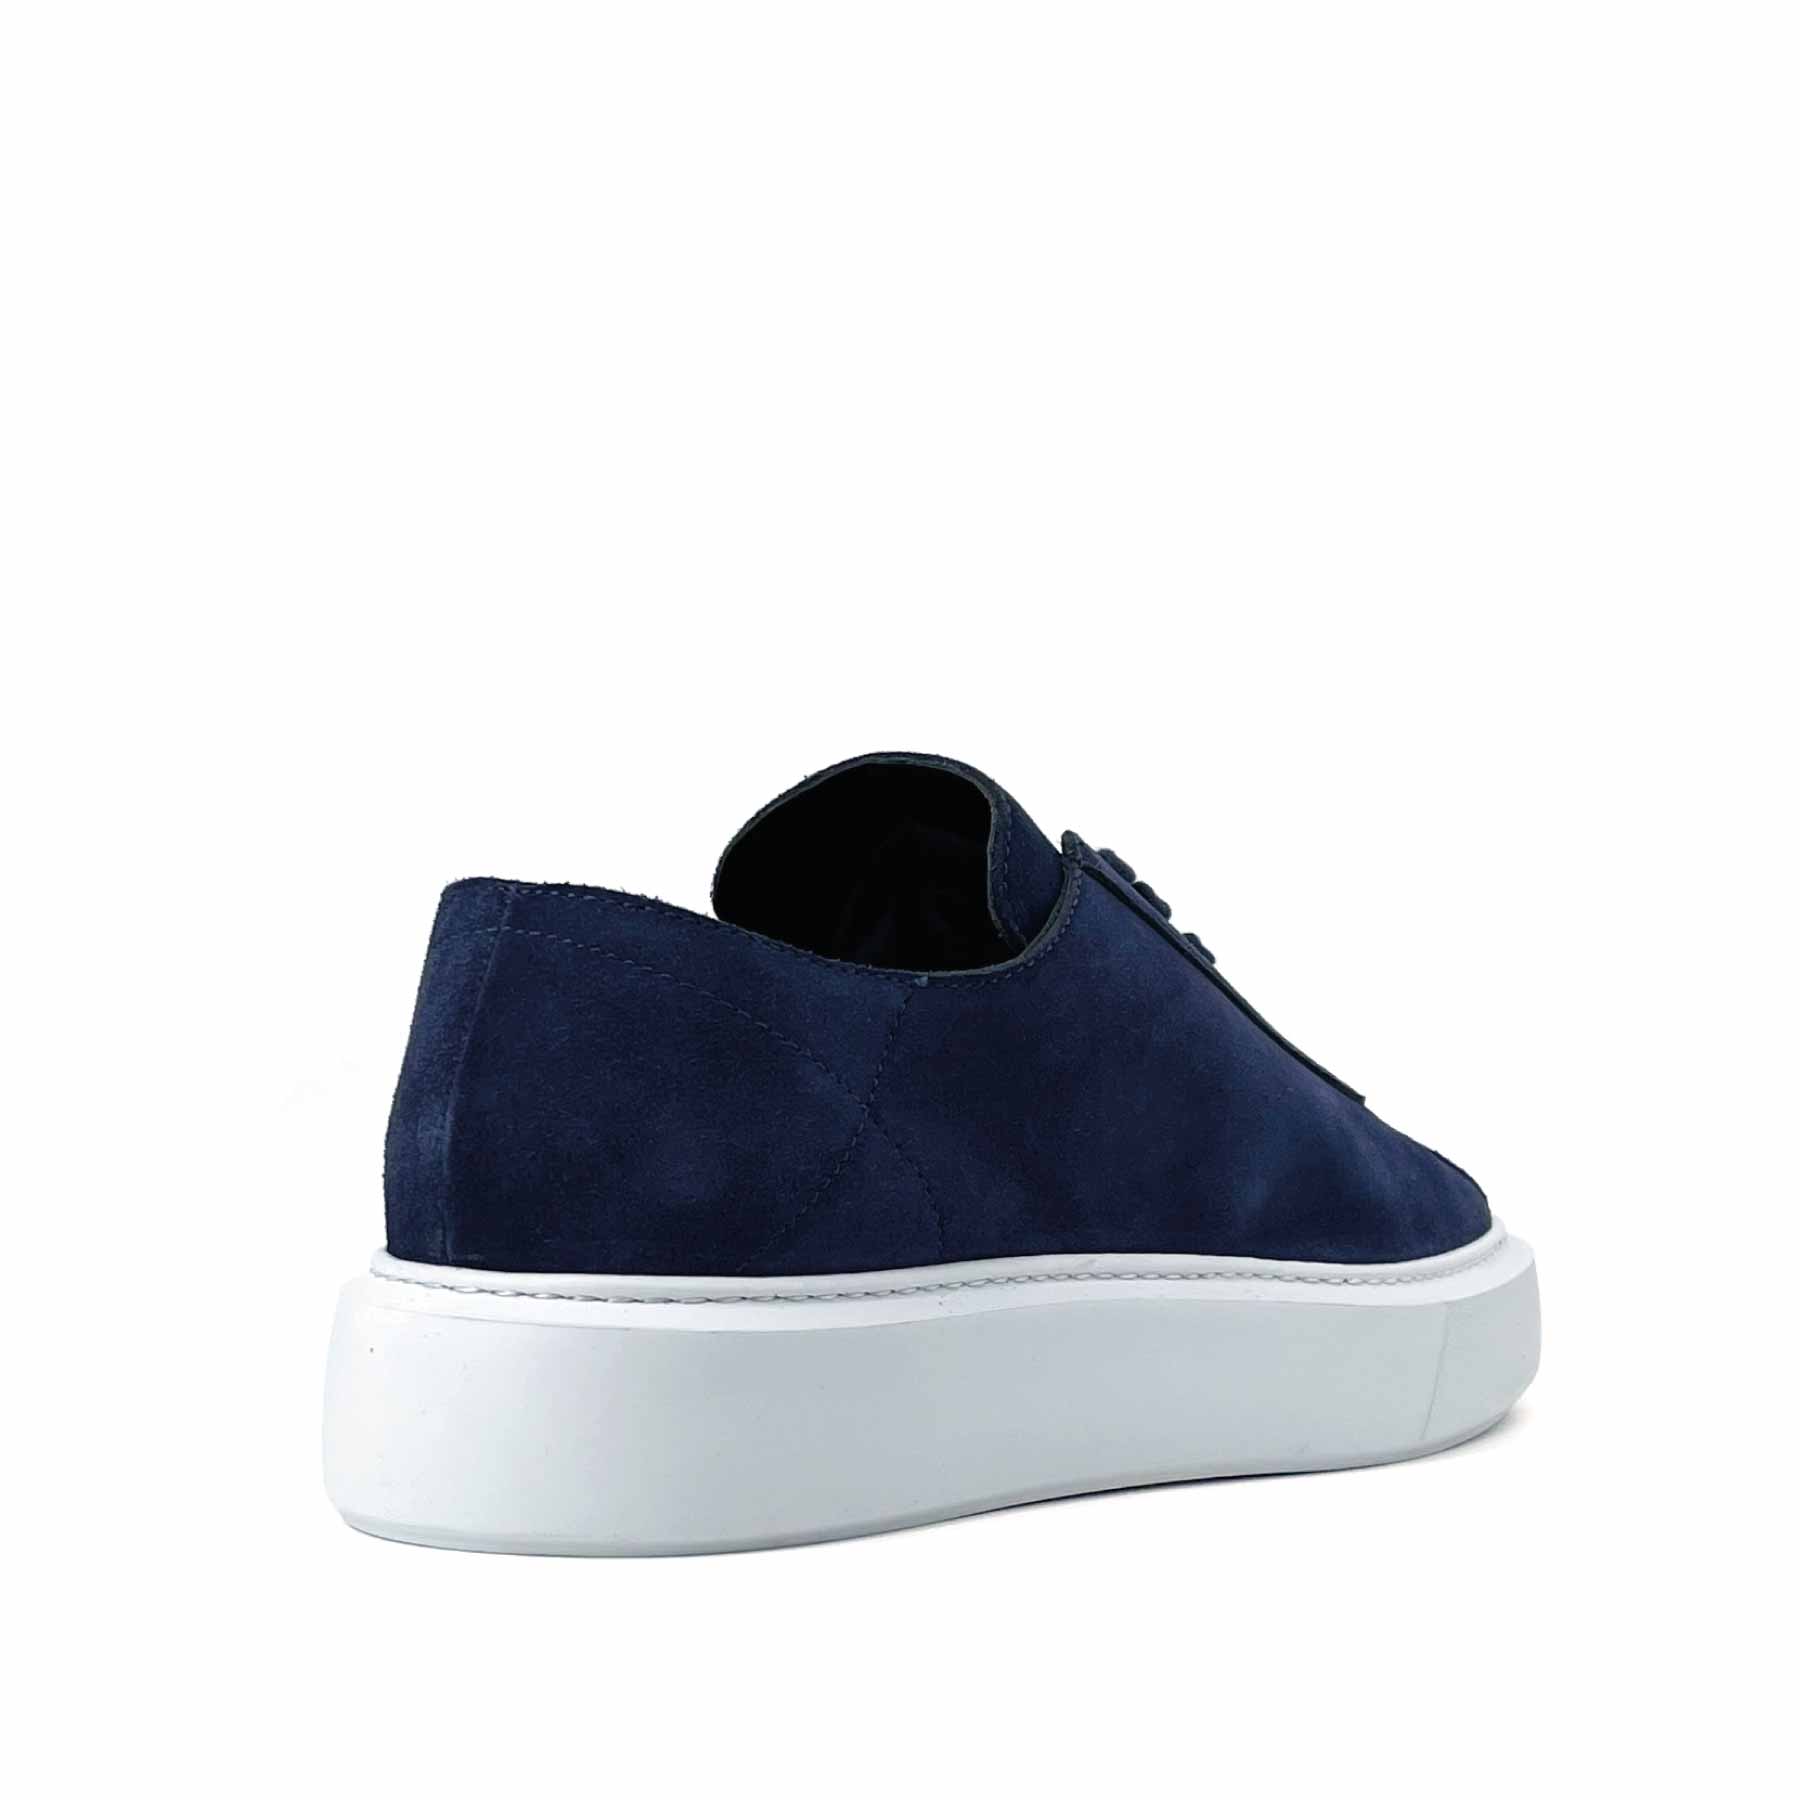 Court Seablue Suede